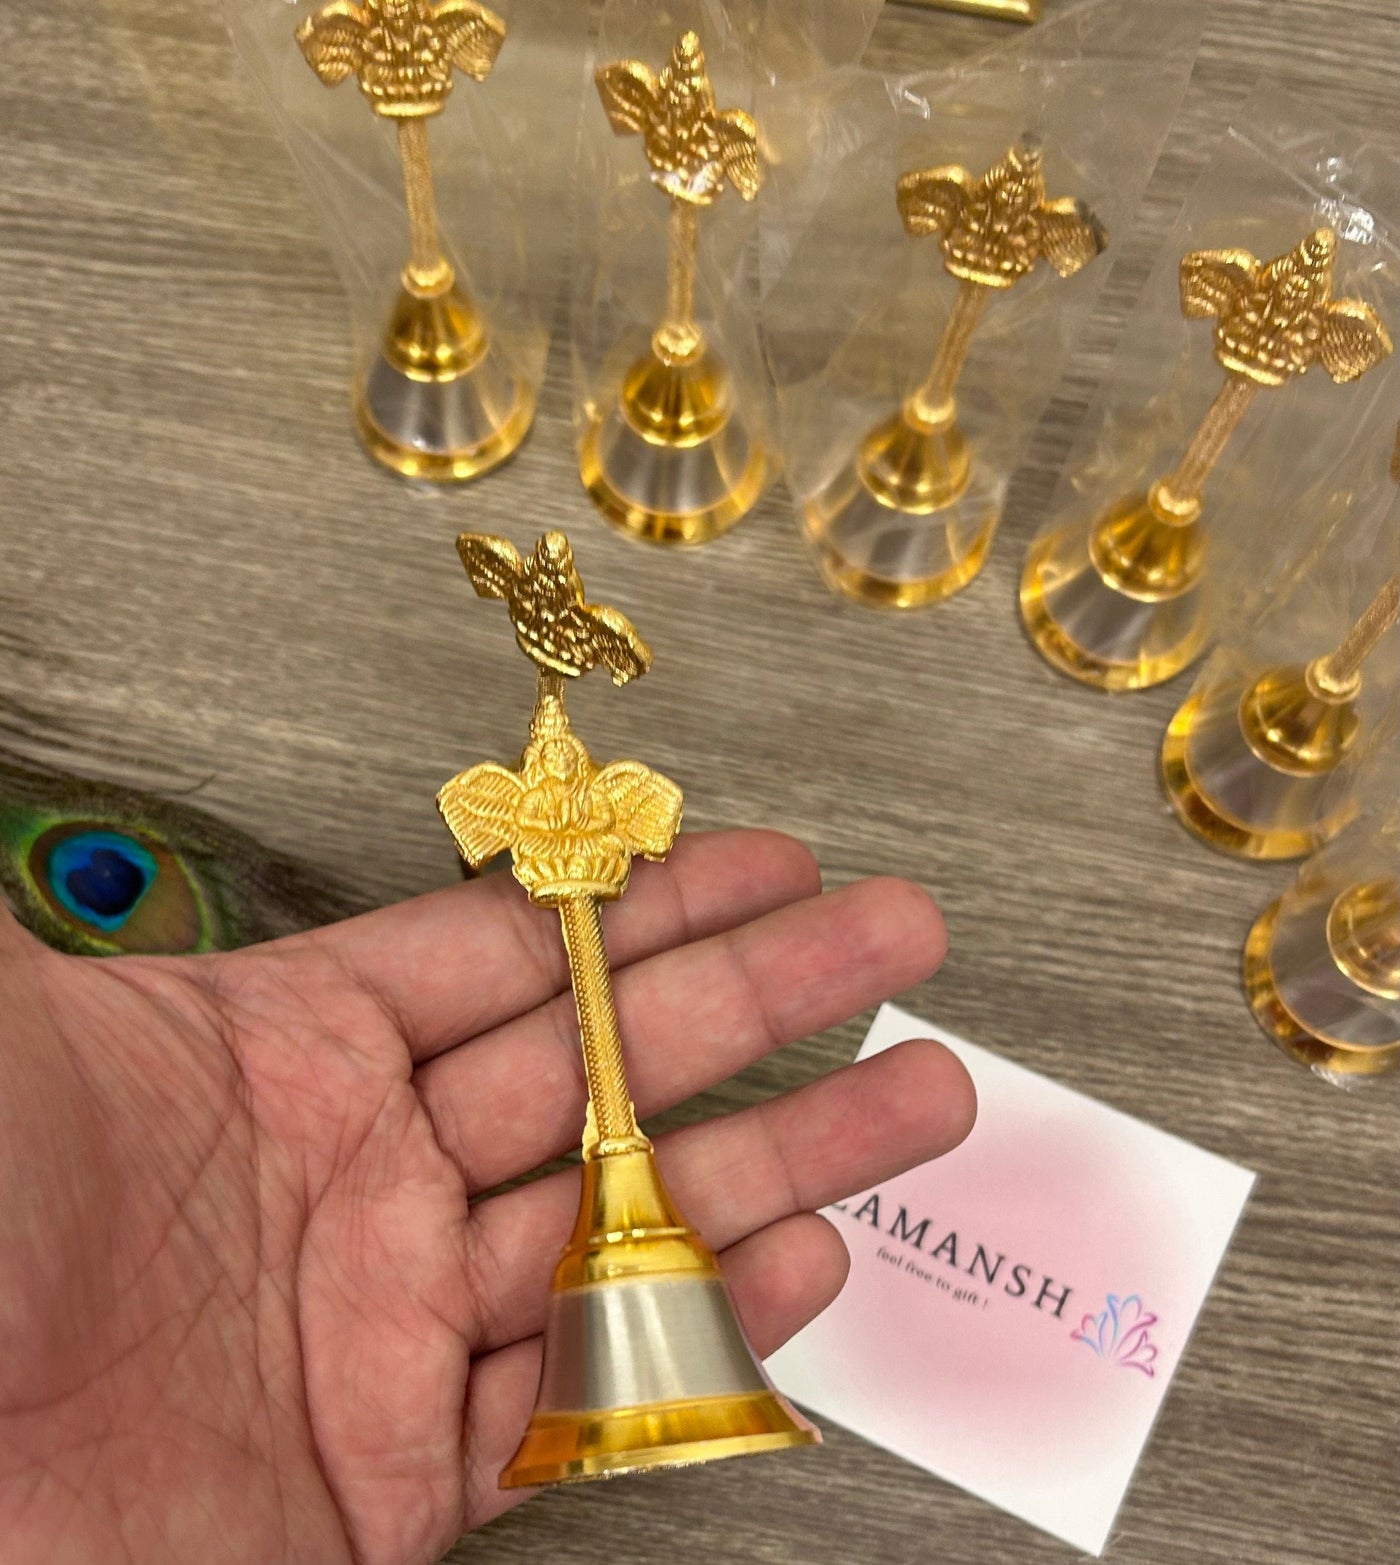 45 Rs per pc on buying 100 pcs | whstp at 8619550223 bells for couple welcome LAMANSH Golden plated Pooja Garuda Bells 🔔Ghanti for Puja or mangal path ceremony giveaways | Bells for welcome in weddings / Return gifts 🎁 for puja ceremony